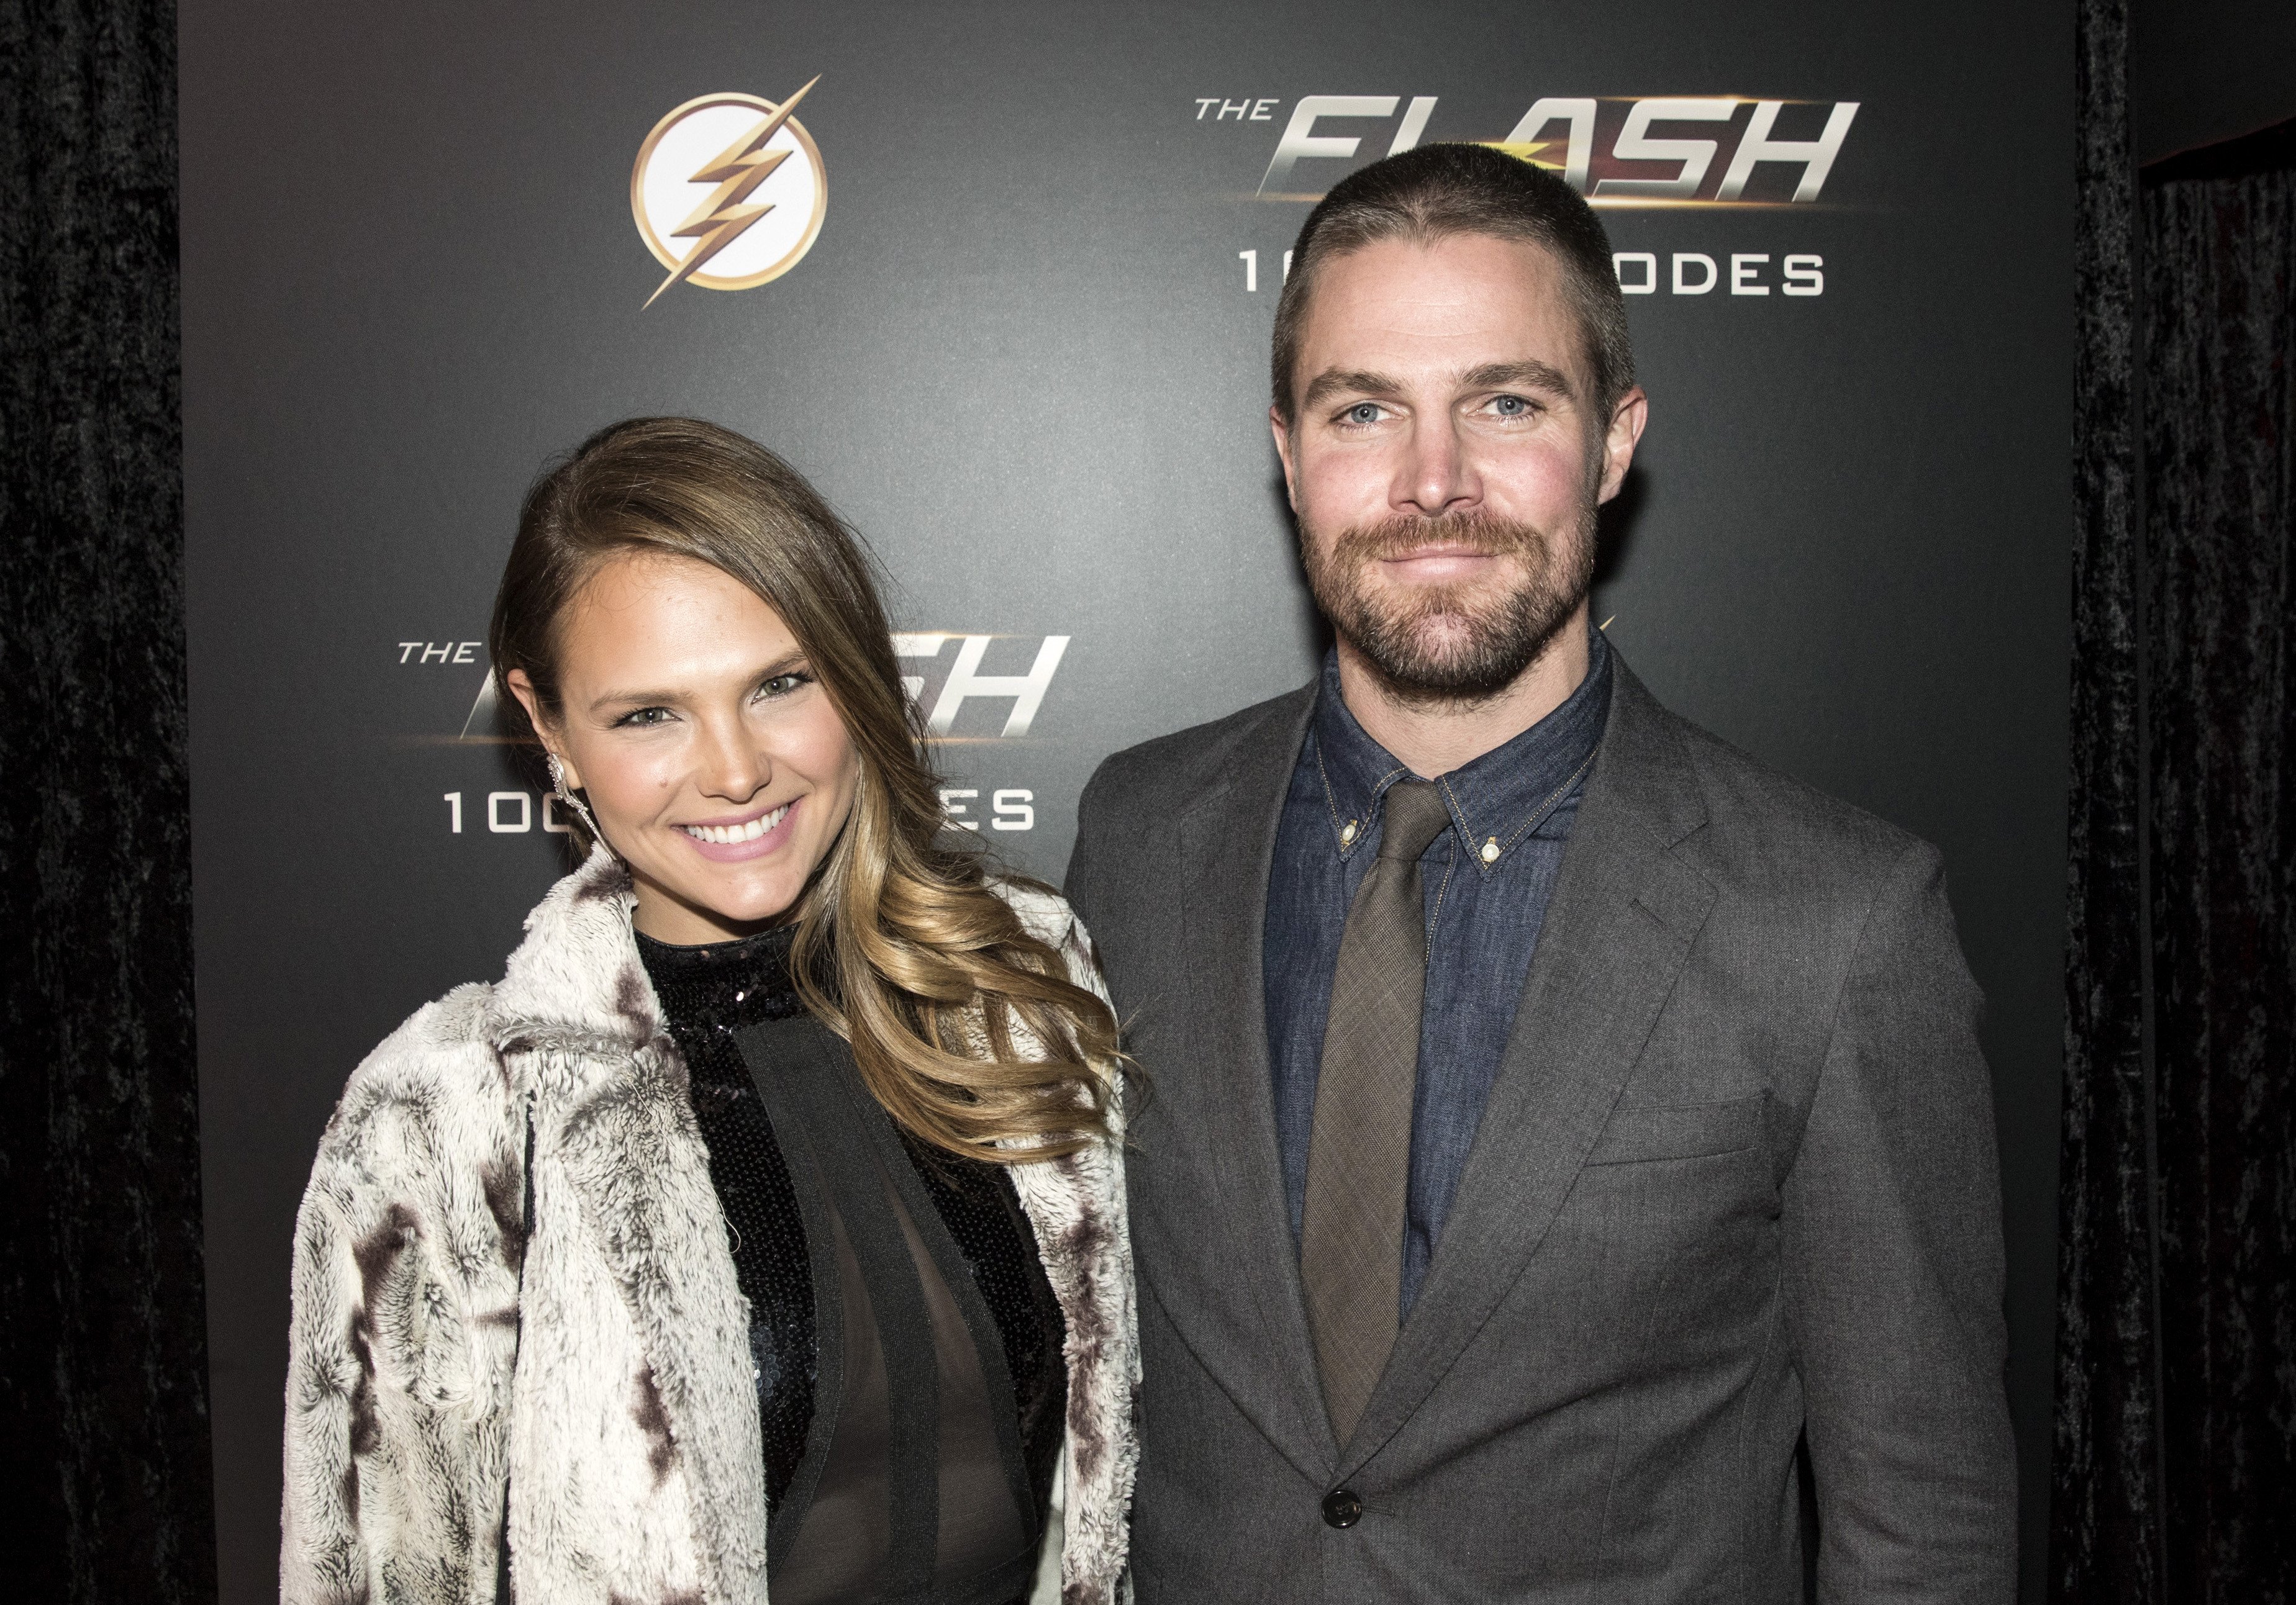 Actors Cassandra Jean and Stephen Amell attend the red carpet at "The Flash" 100TH Episode Celebration at the Commodore Ballroom on November 17, 2018 in Vancouver, Canada. | Source: Getty Images